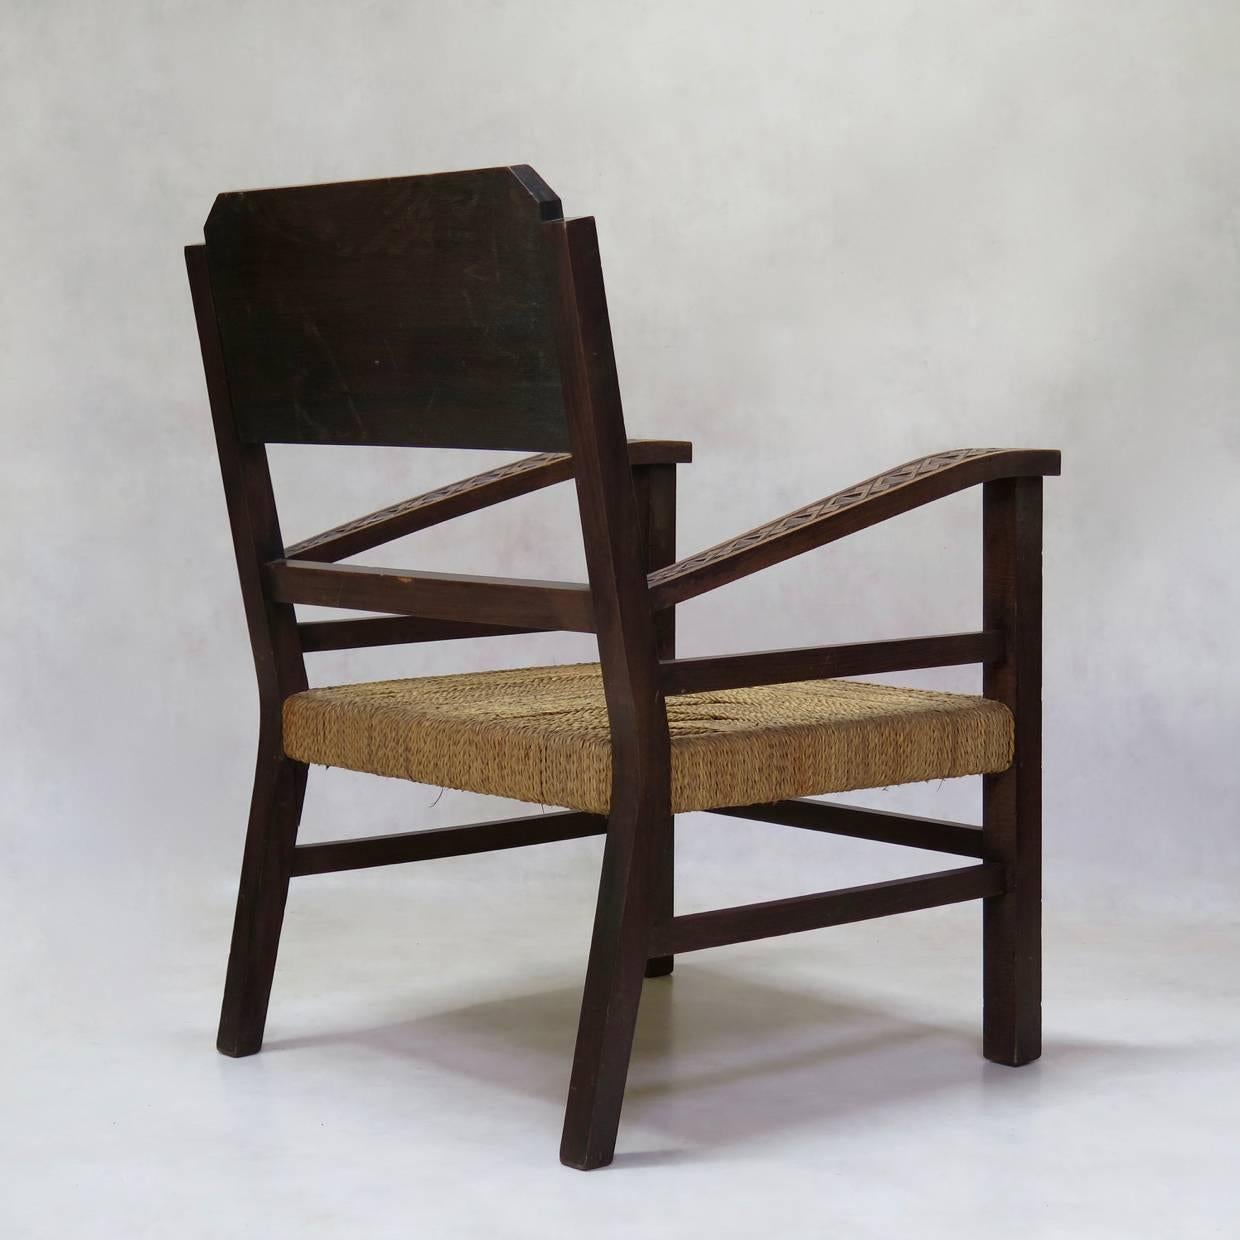 20th Century Pair of French Mid-Century Armchairs Carved with Geometric African Motifs